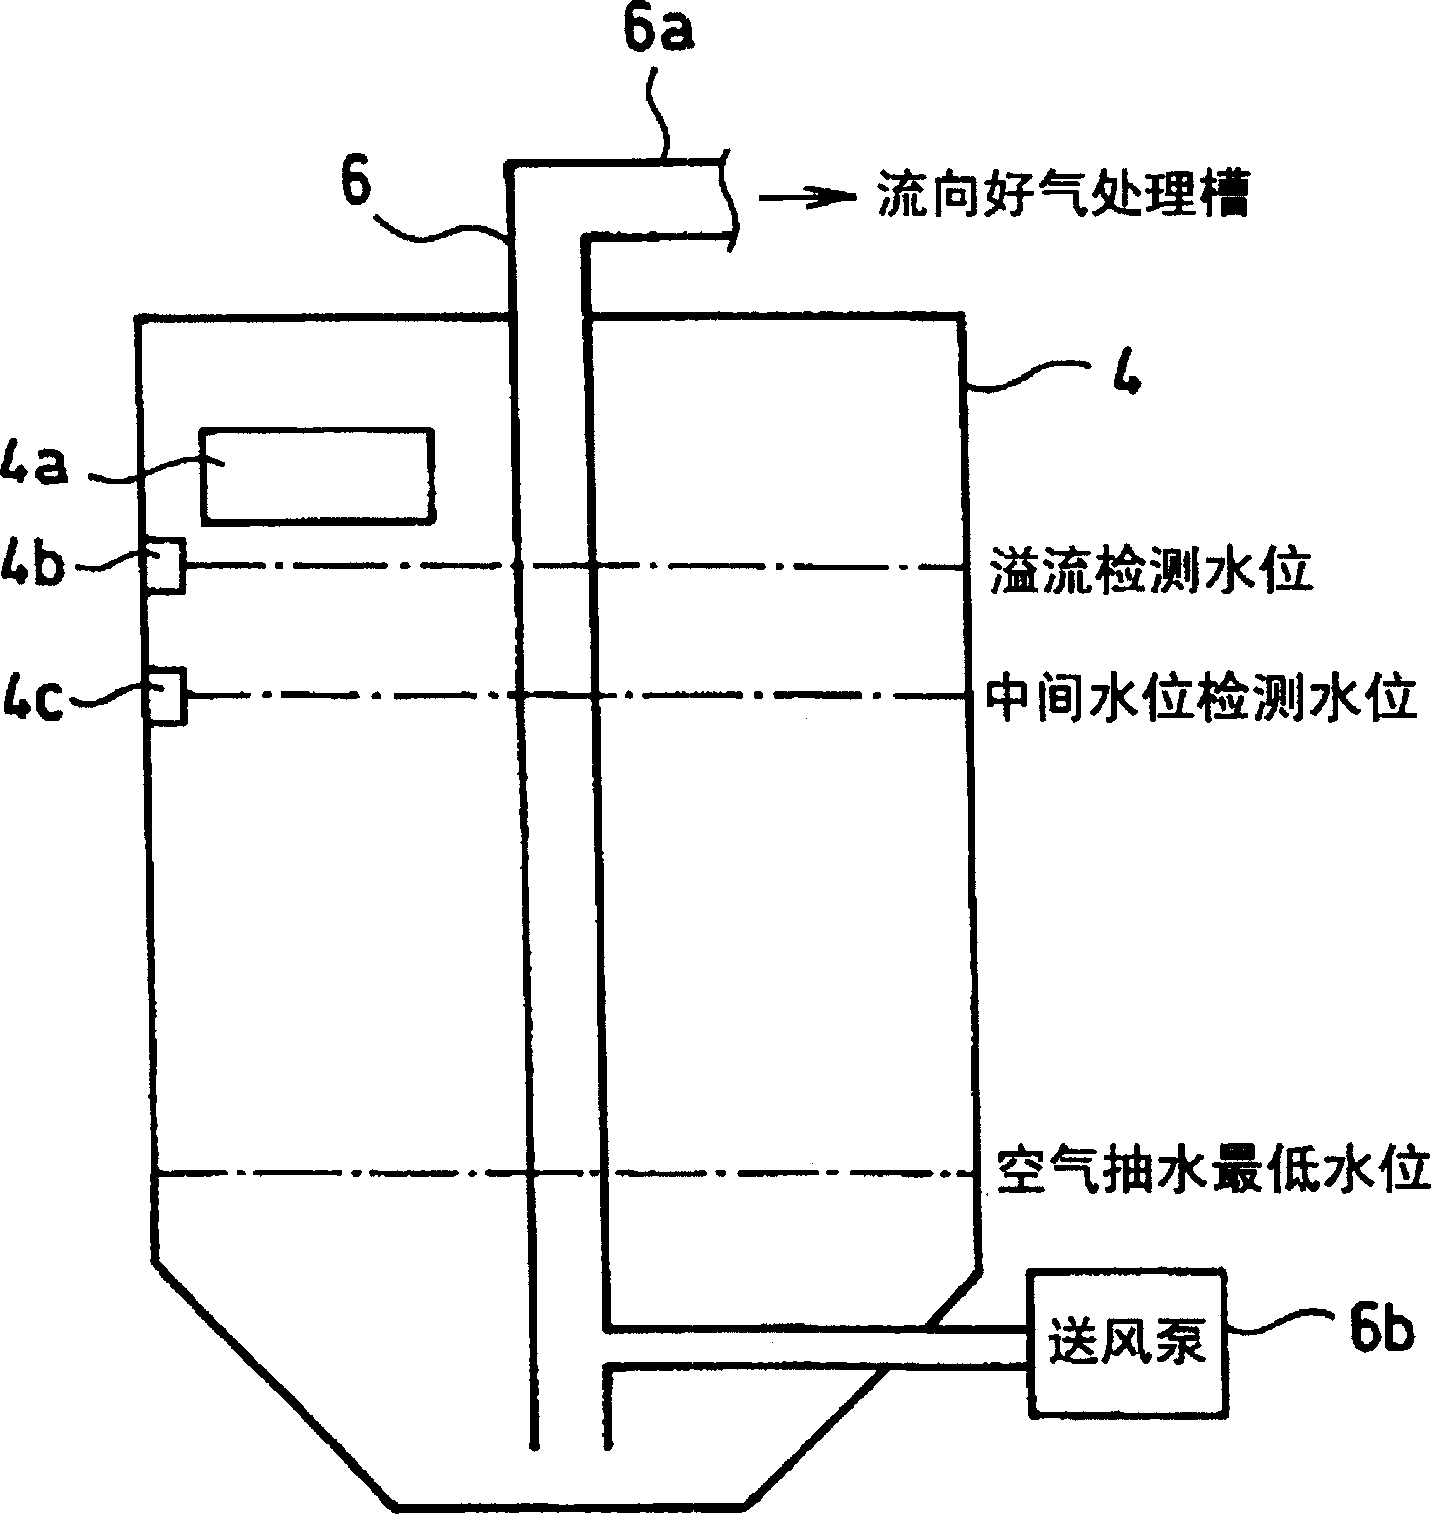 Processing system for drain off water